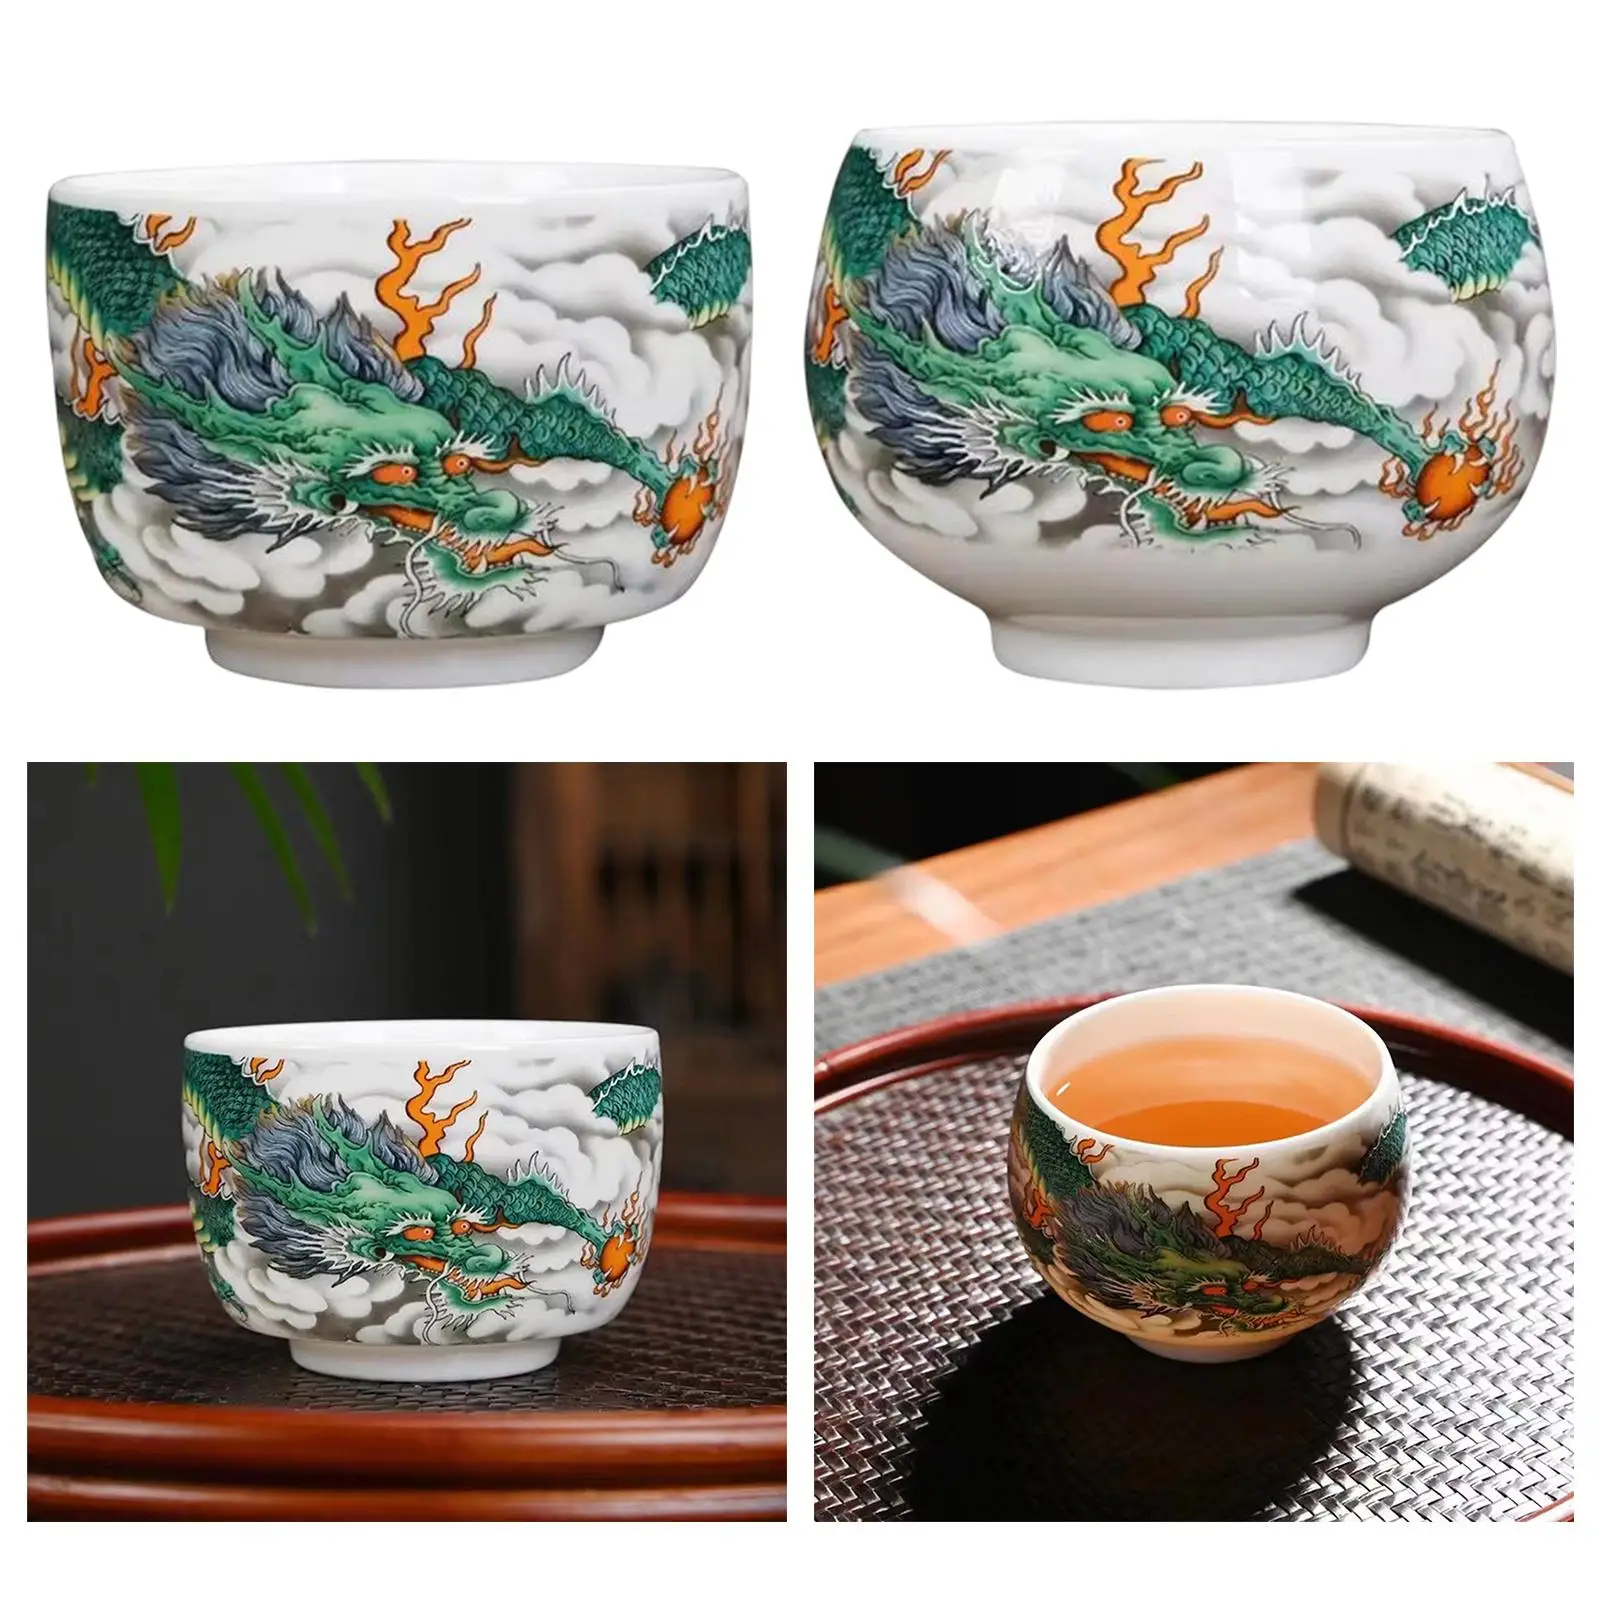 Ceramic Chinese Retro Ceramic Tea Cup Porcelain Chinese Tea Cup Vintage Style Handmade Traditional Teacup for Tea Lover Teahouse